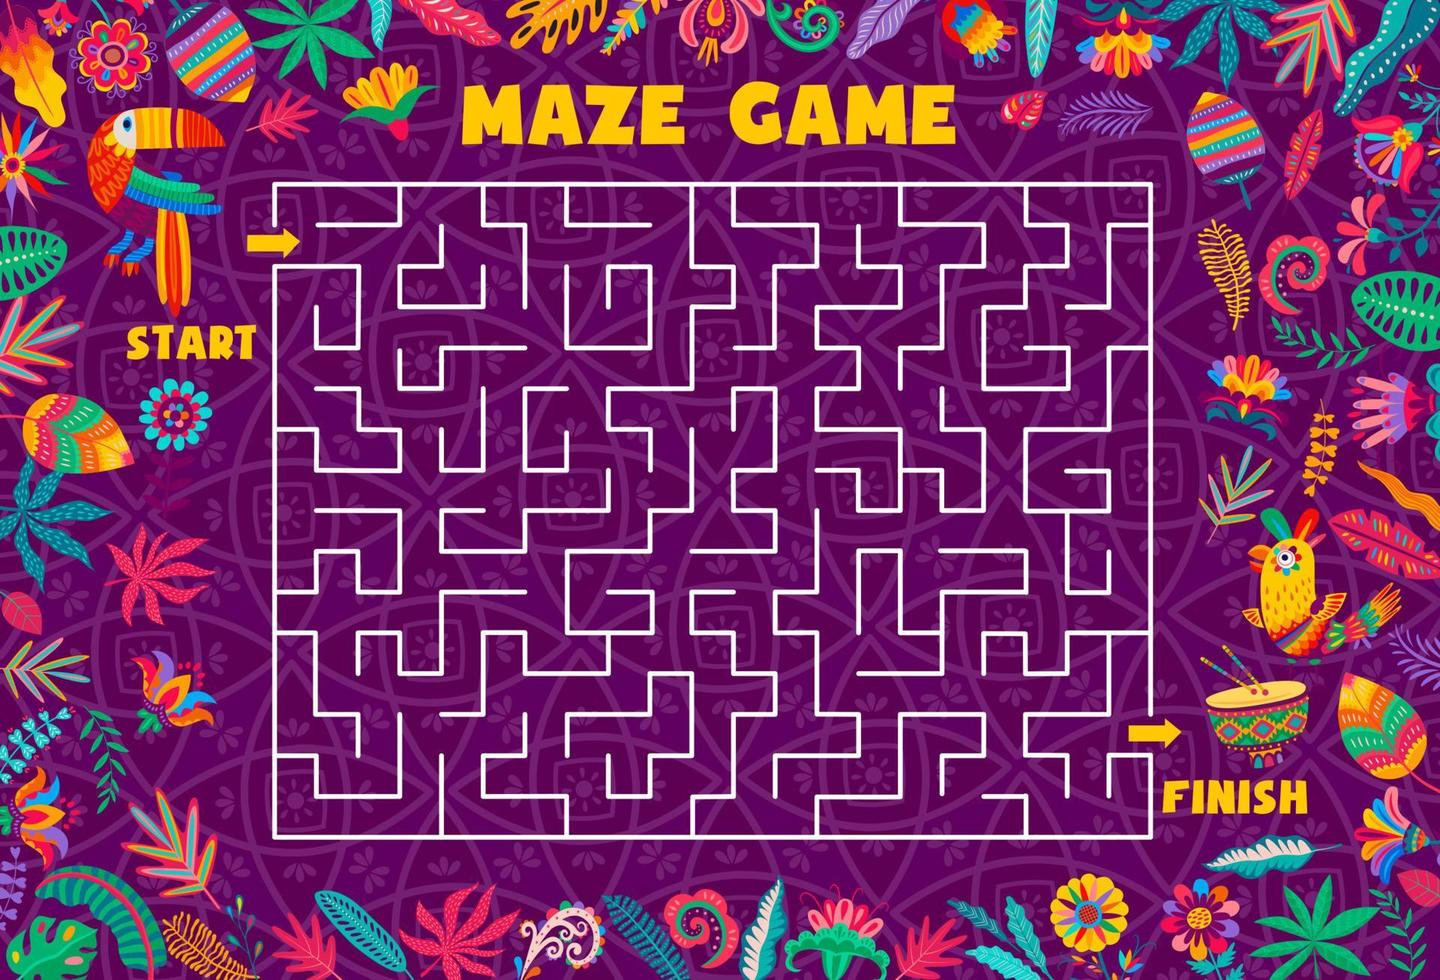 Labyrinth maze game help toucan to find exit vector